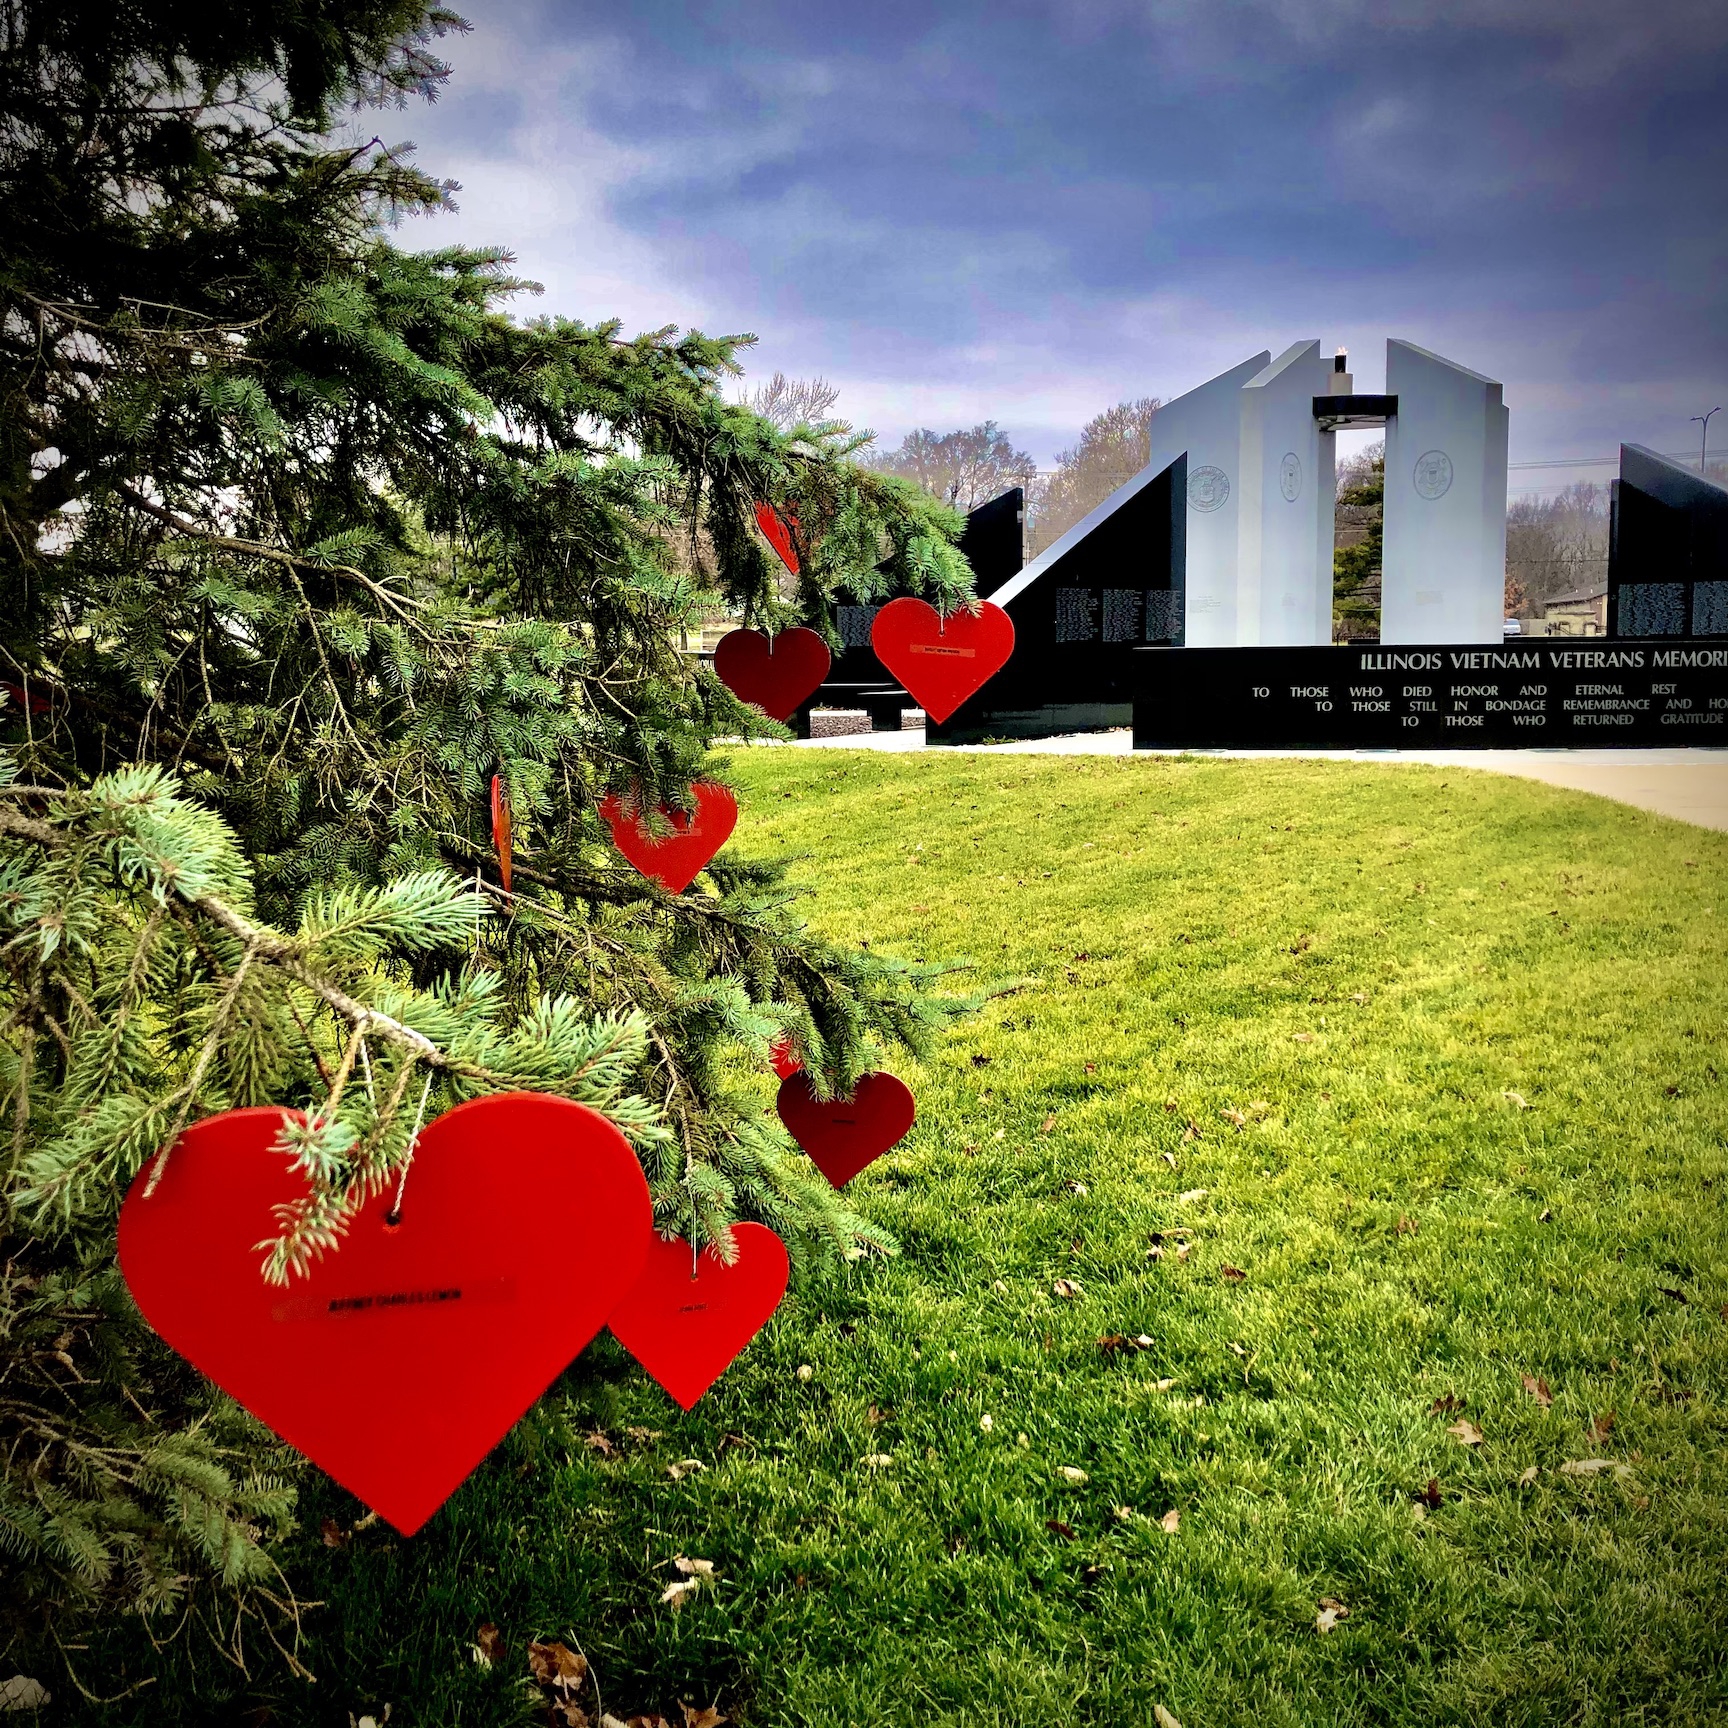 heart ornaments hanging from evergreen tree with monument in background